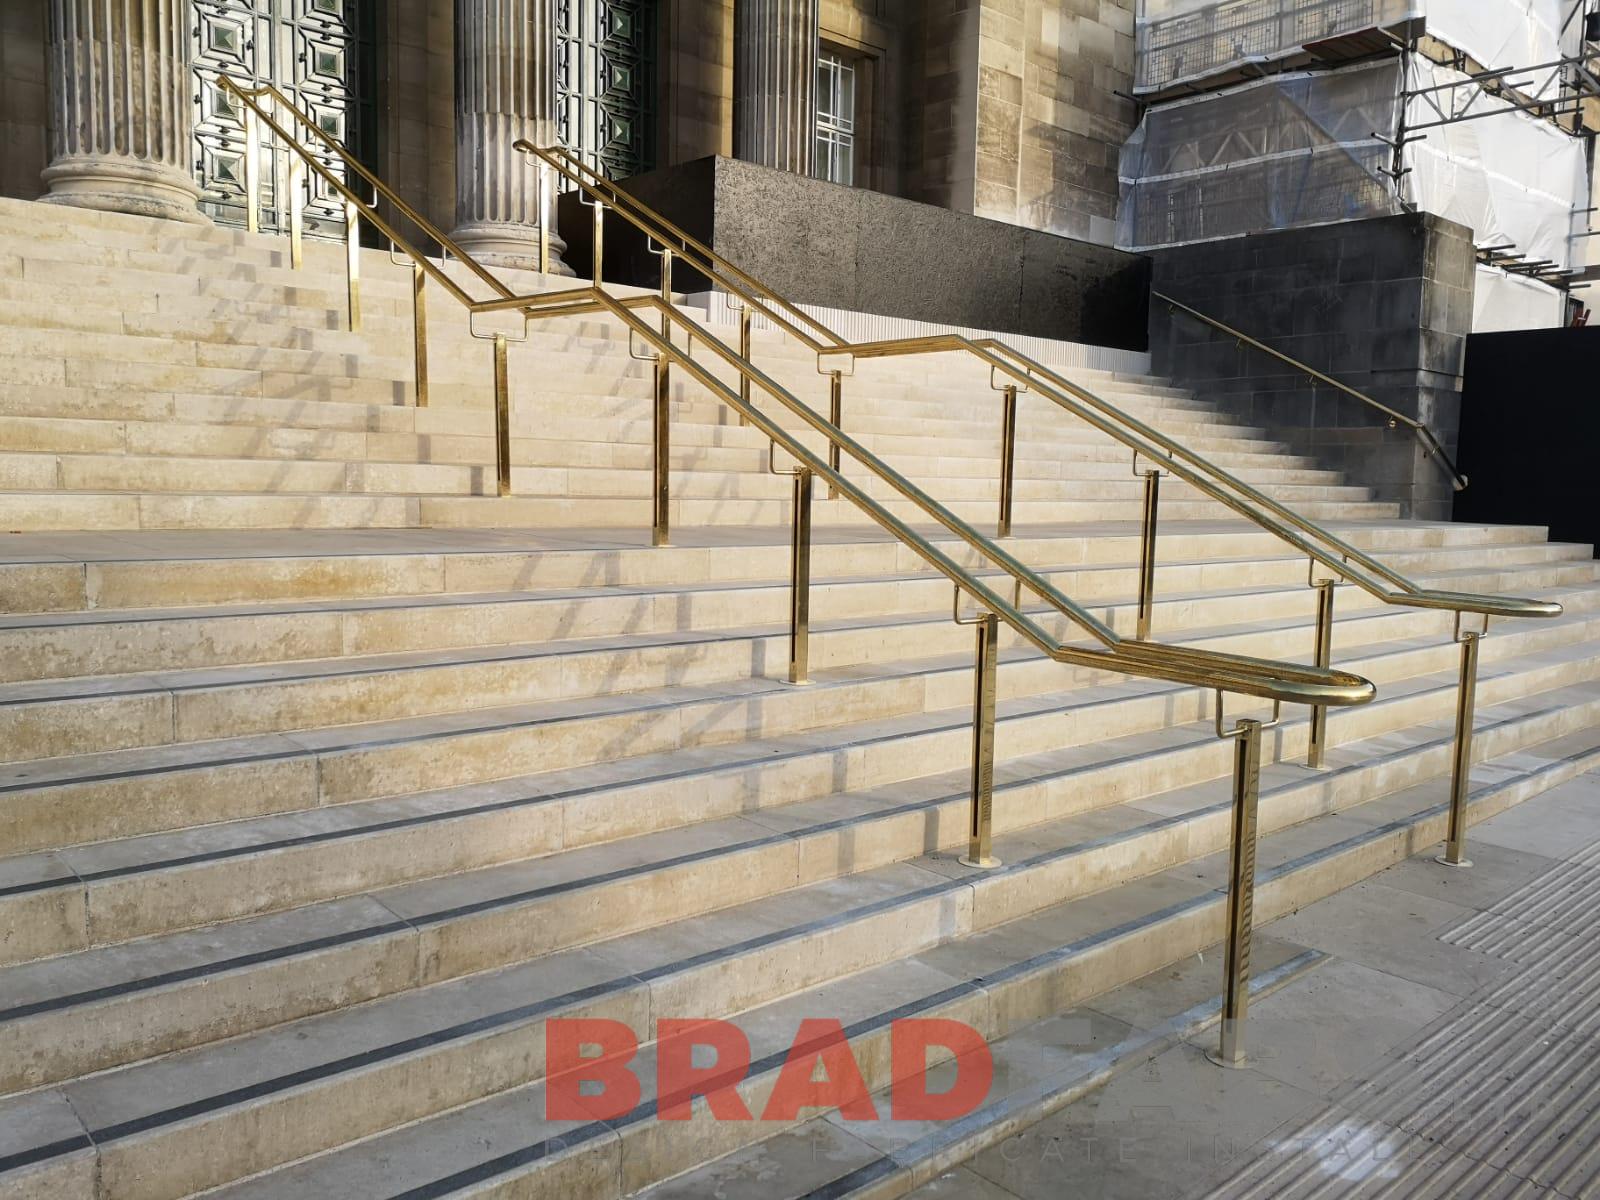 Brass balustrade and handrails by Bradfabs